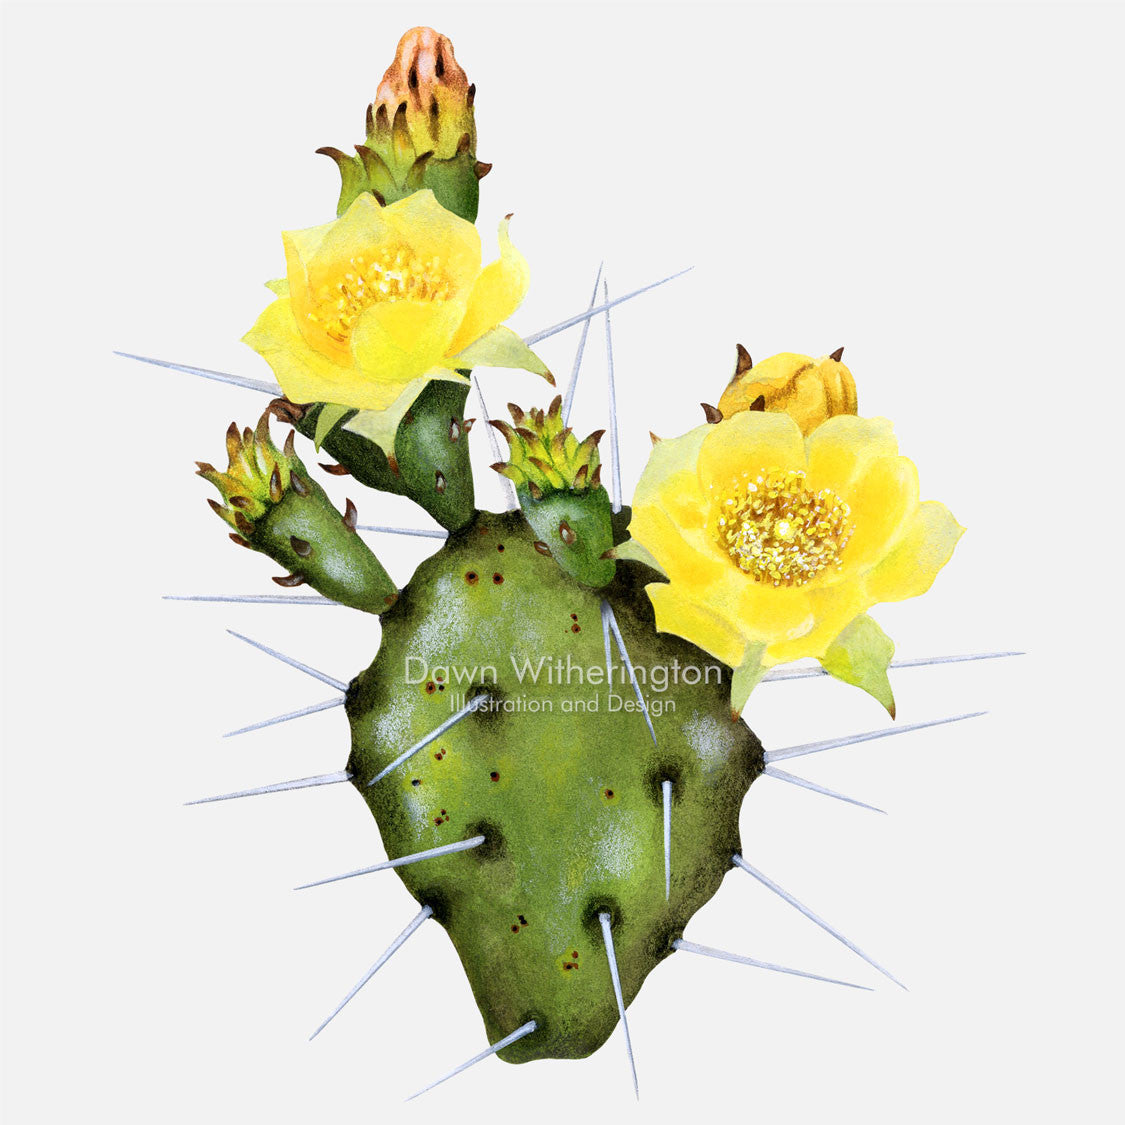 This beautiful illustration an eastern prickly pear cactus (devil's tongue), Opuntia humifusa, is botanically accurate in detail.